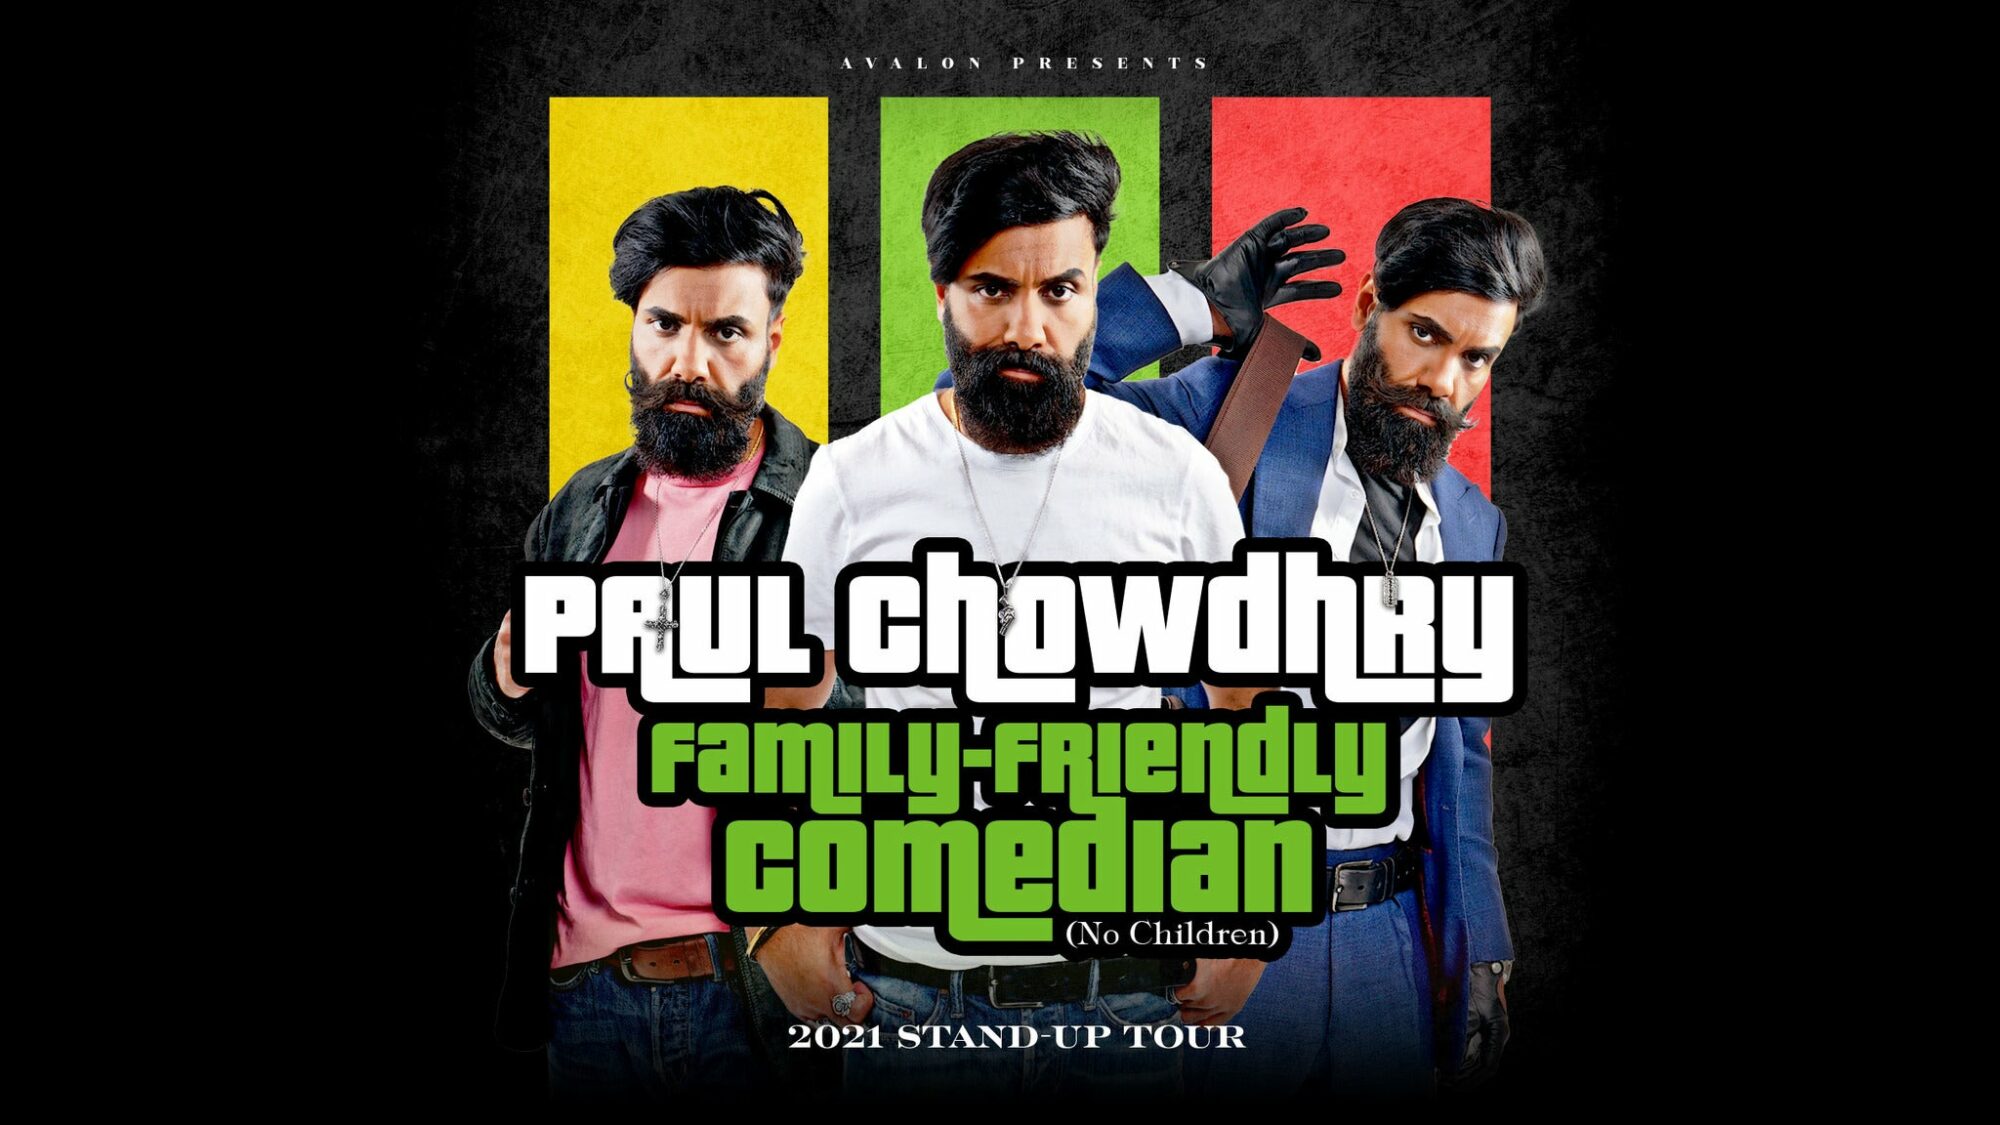 Image name Paul Chowdhry Family Friendly Comedian at St Georges Hall Bradford Bradford the 22 image from the post Paul Chowdhry: Family Friendly Comedian at Hull City Hall, Hull in Yorkshire.com.